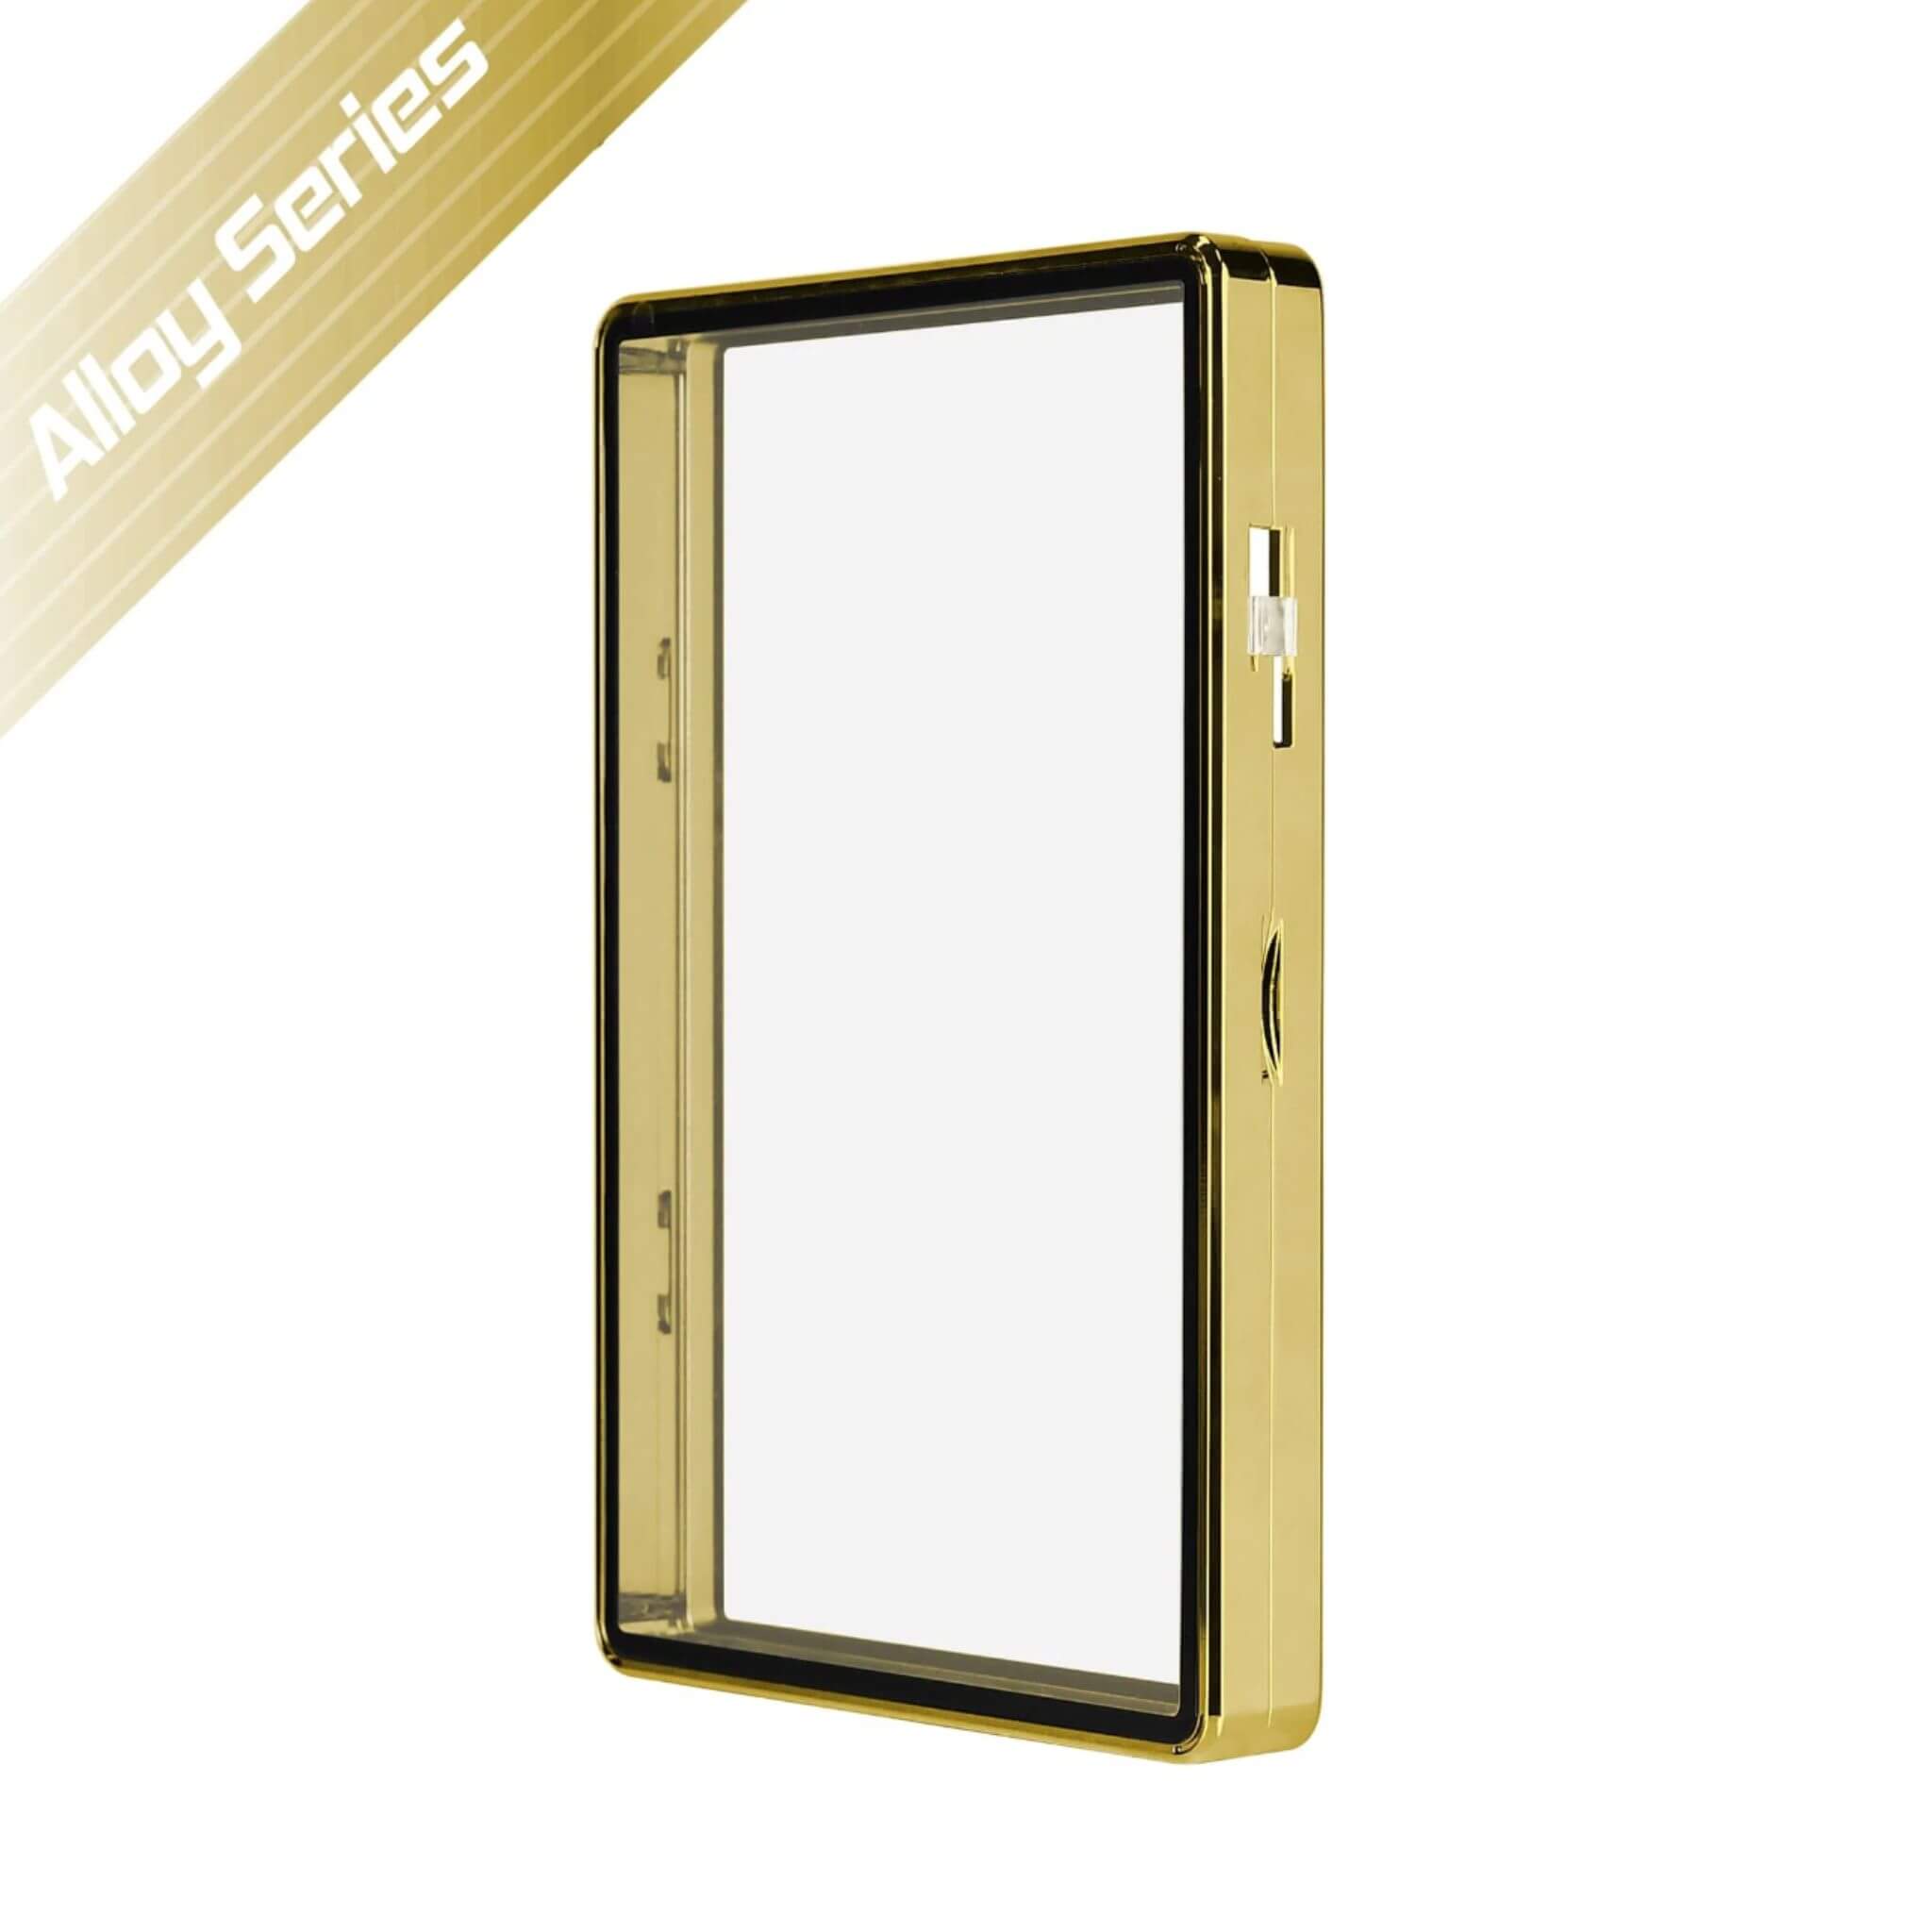 Limited Edition Gold Thick PSA Slabmags Alloy Series